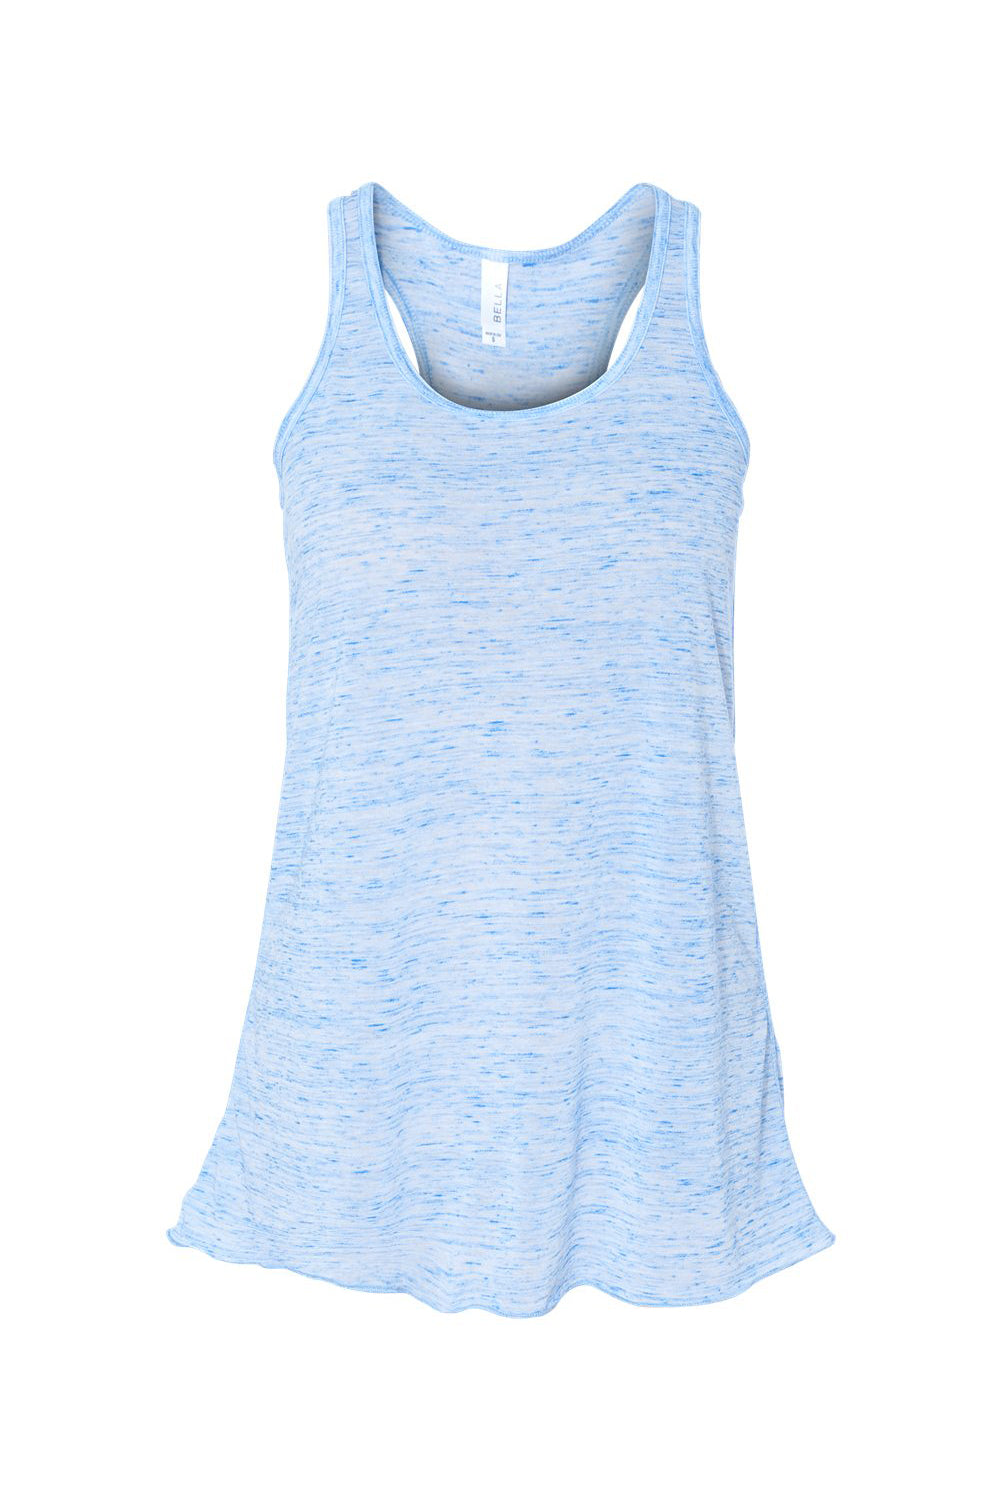 Bella + Canvas BC8800/B8800/8800 Womens Flowy Tank Top Blue Marble Flat Front